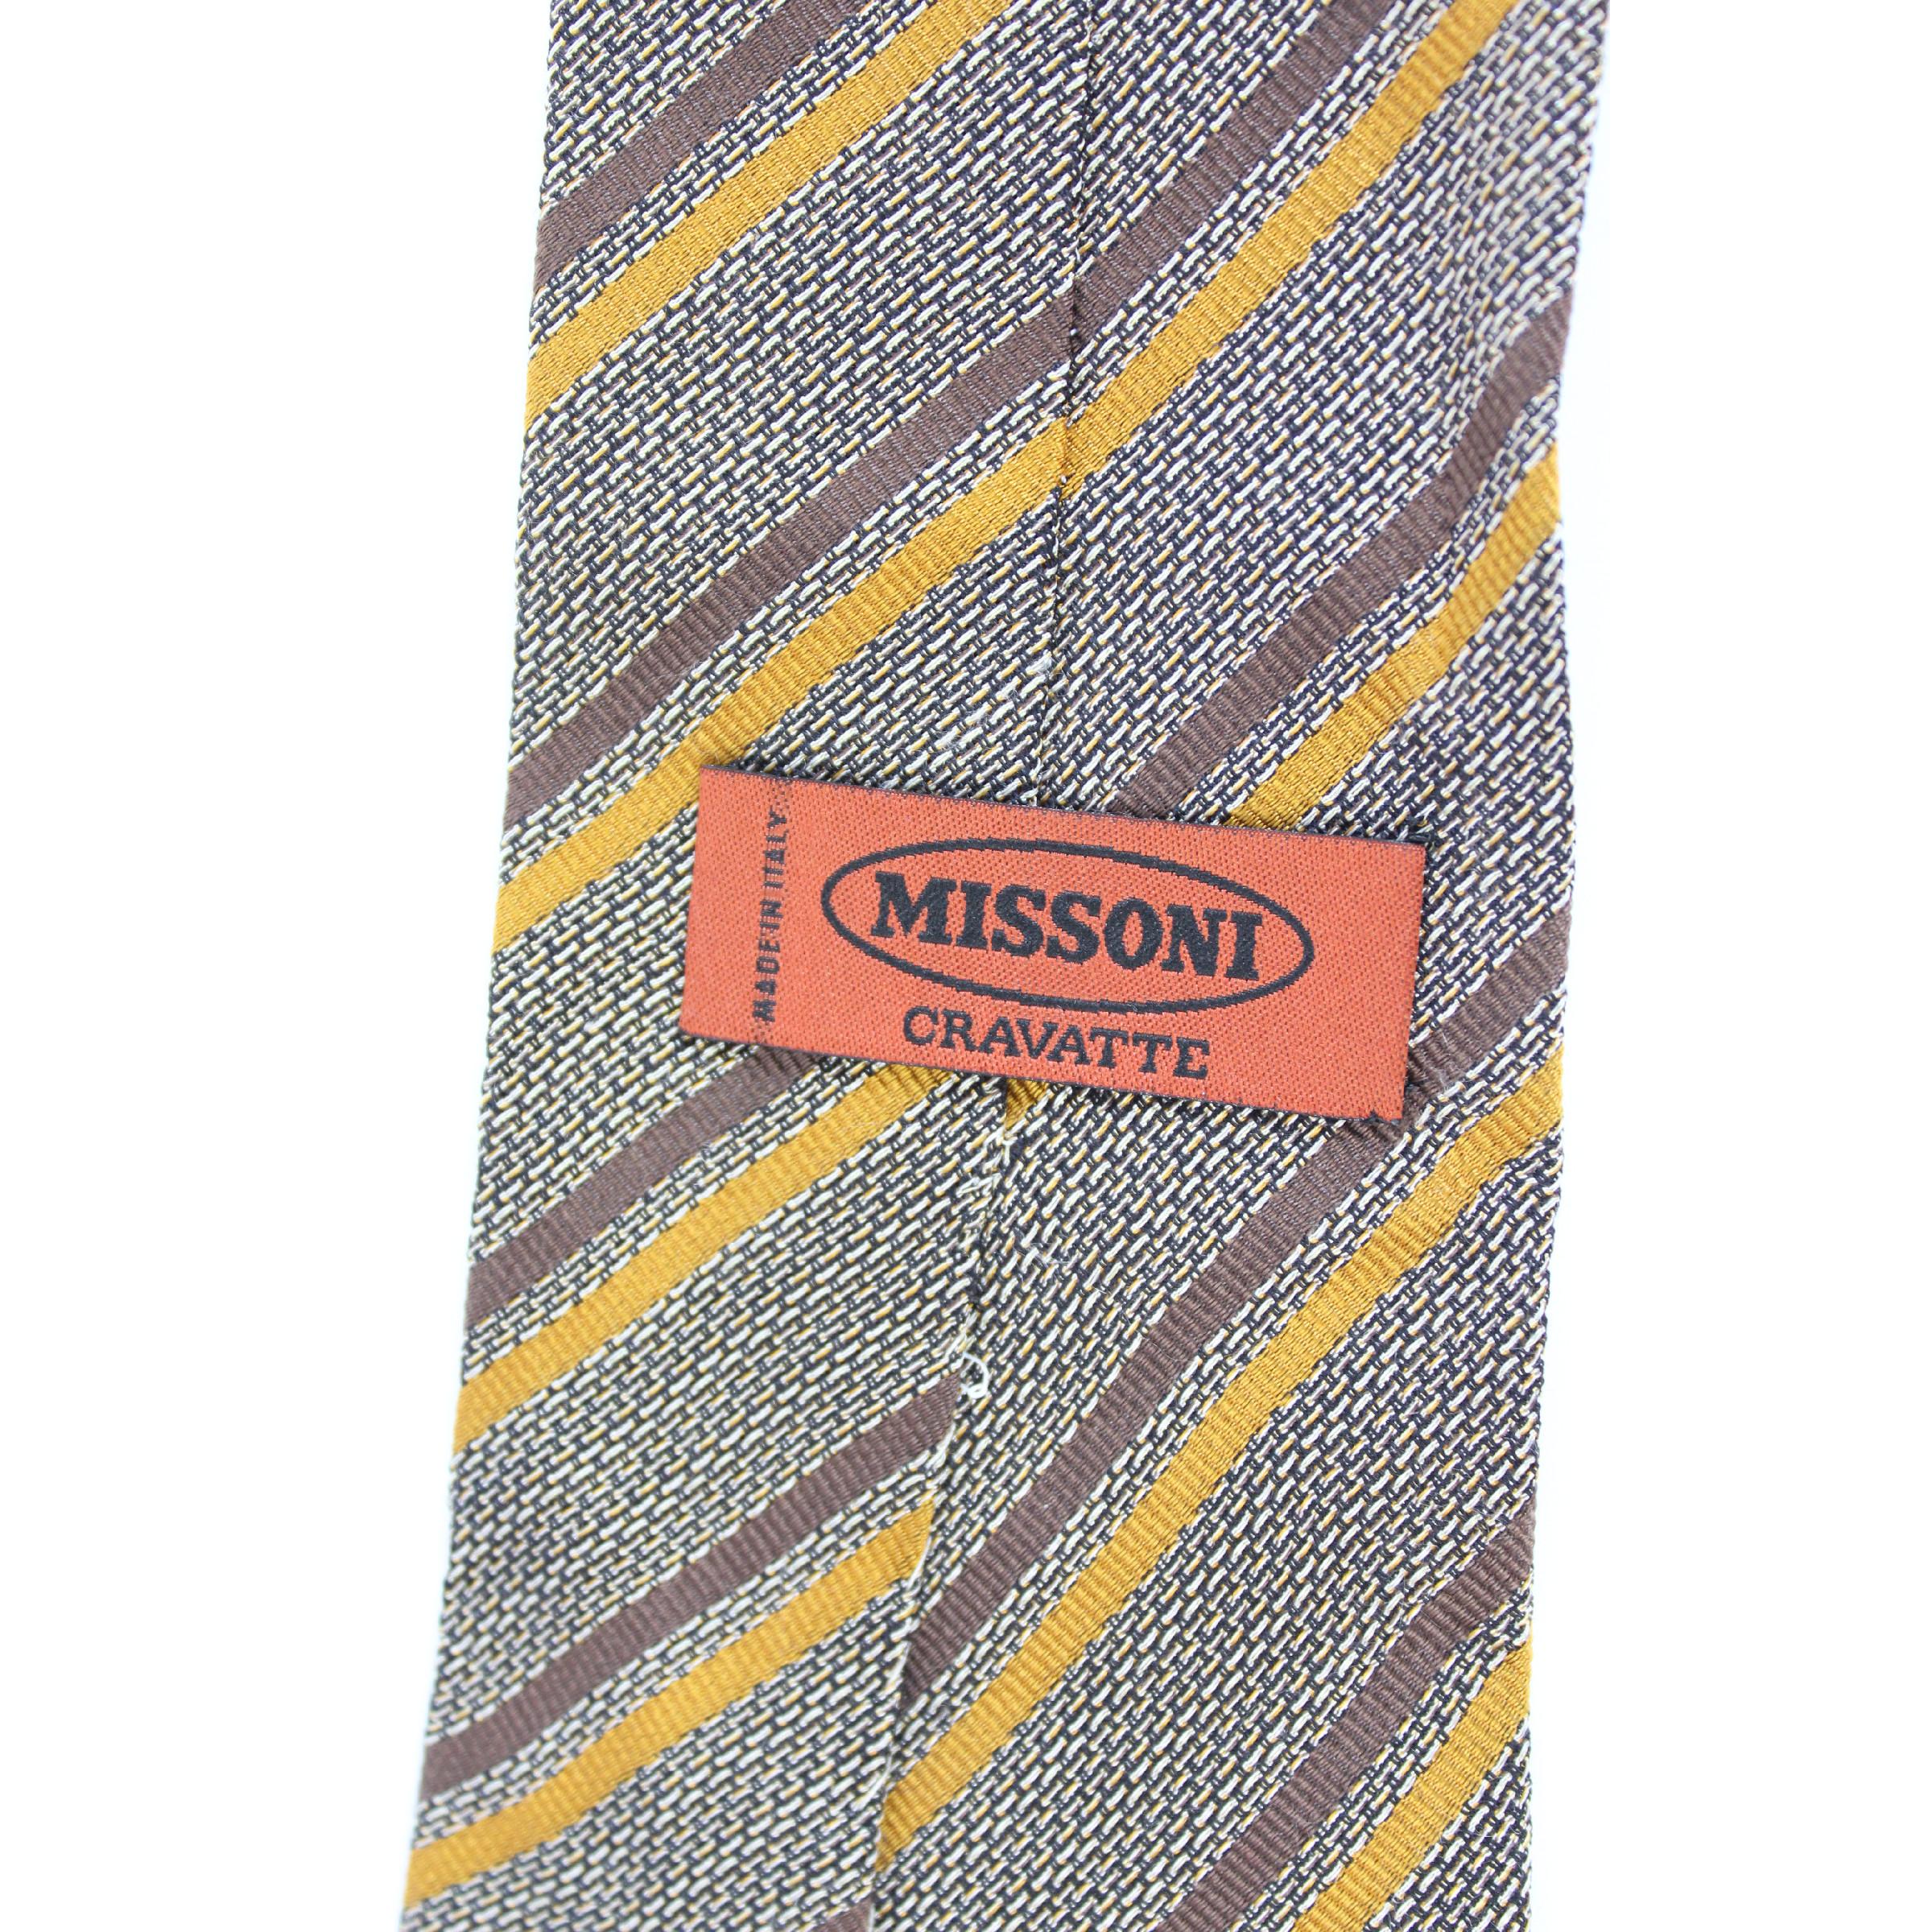 Vintage Missoni tie. Striped brown and beige, 100% silk. Made italy. Excellent vintage condition.

Length: about 150 cm
Width: about 10 cm